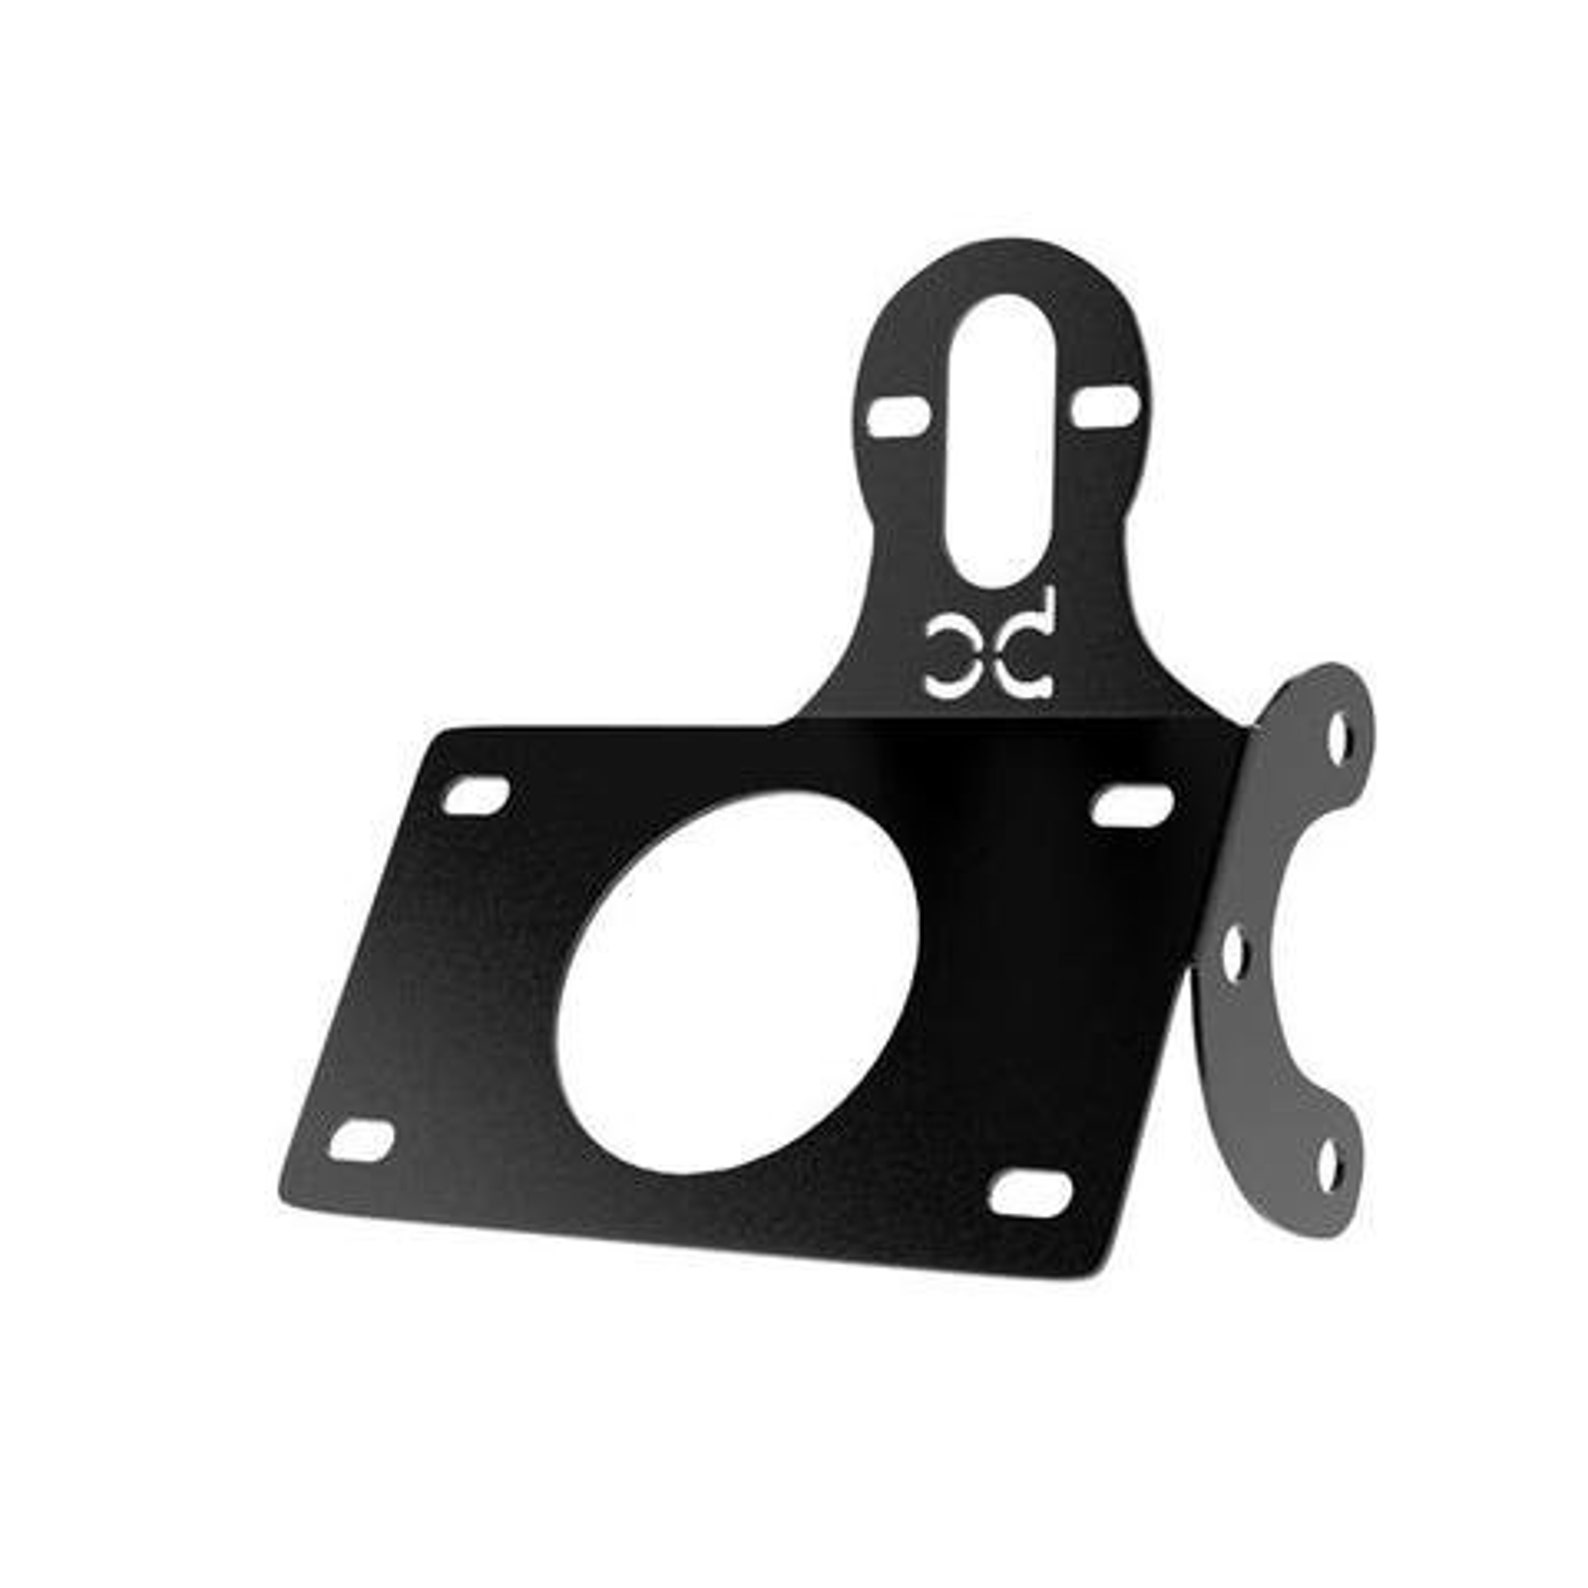 Multi-fit Horizontal License Plate Bracket for Motorcycles - Etsy